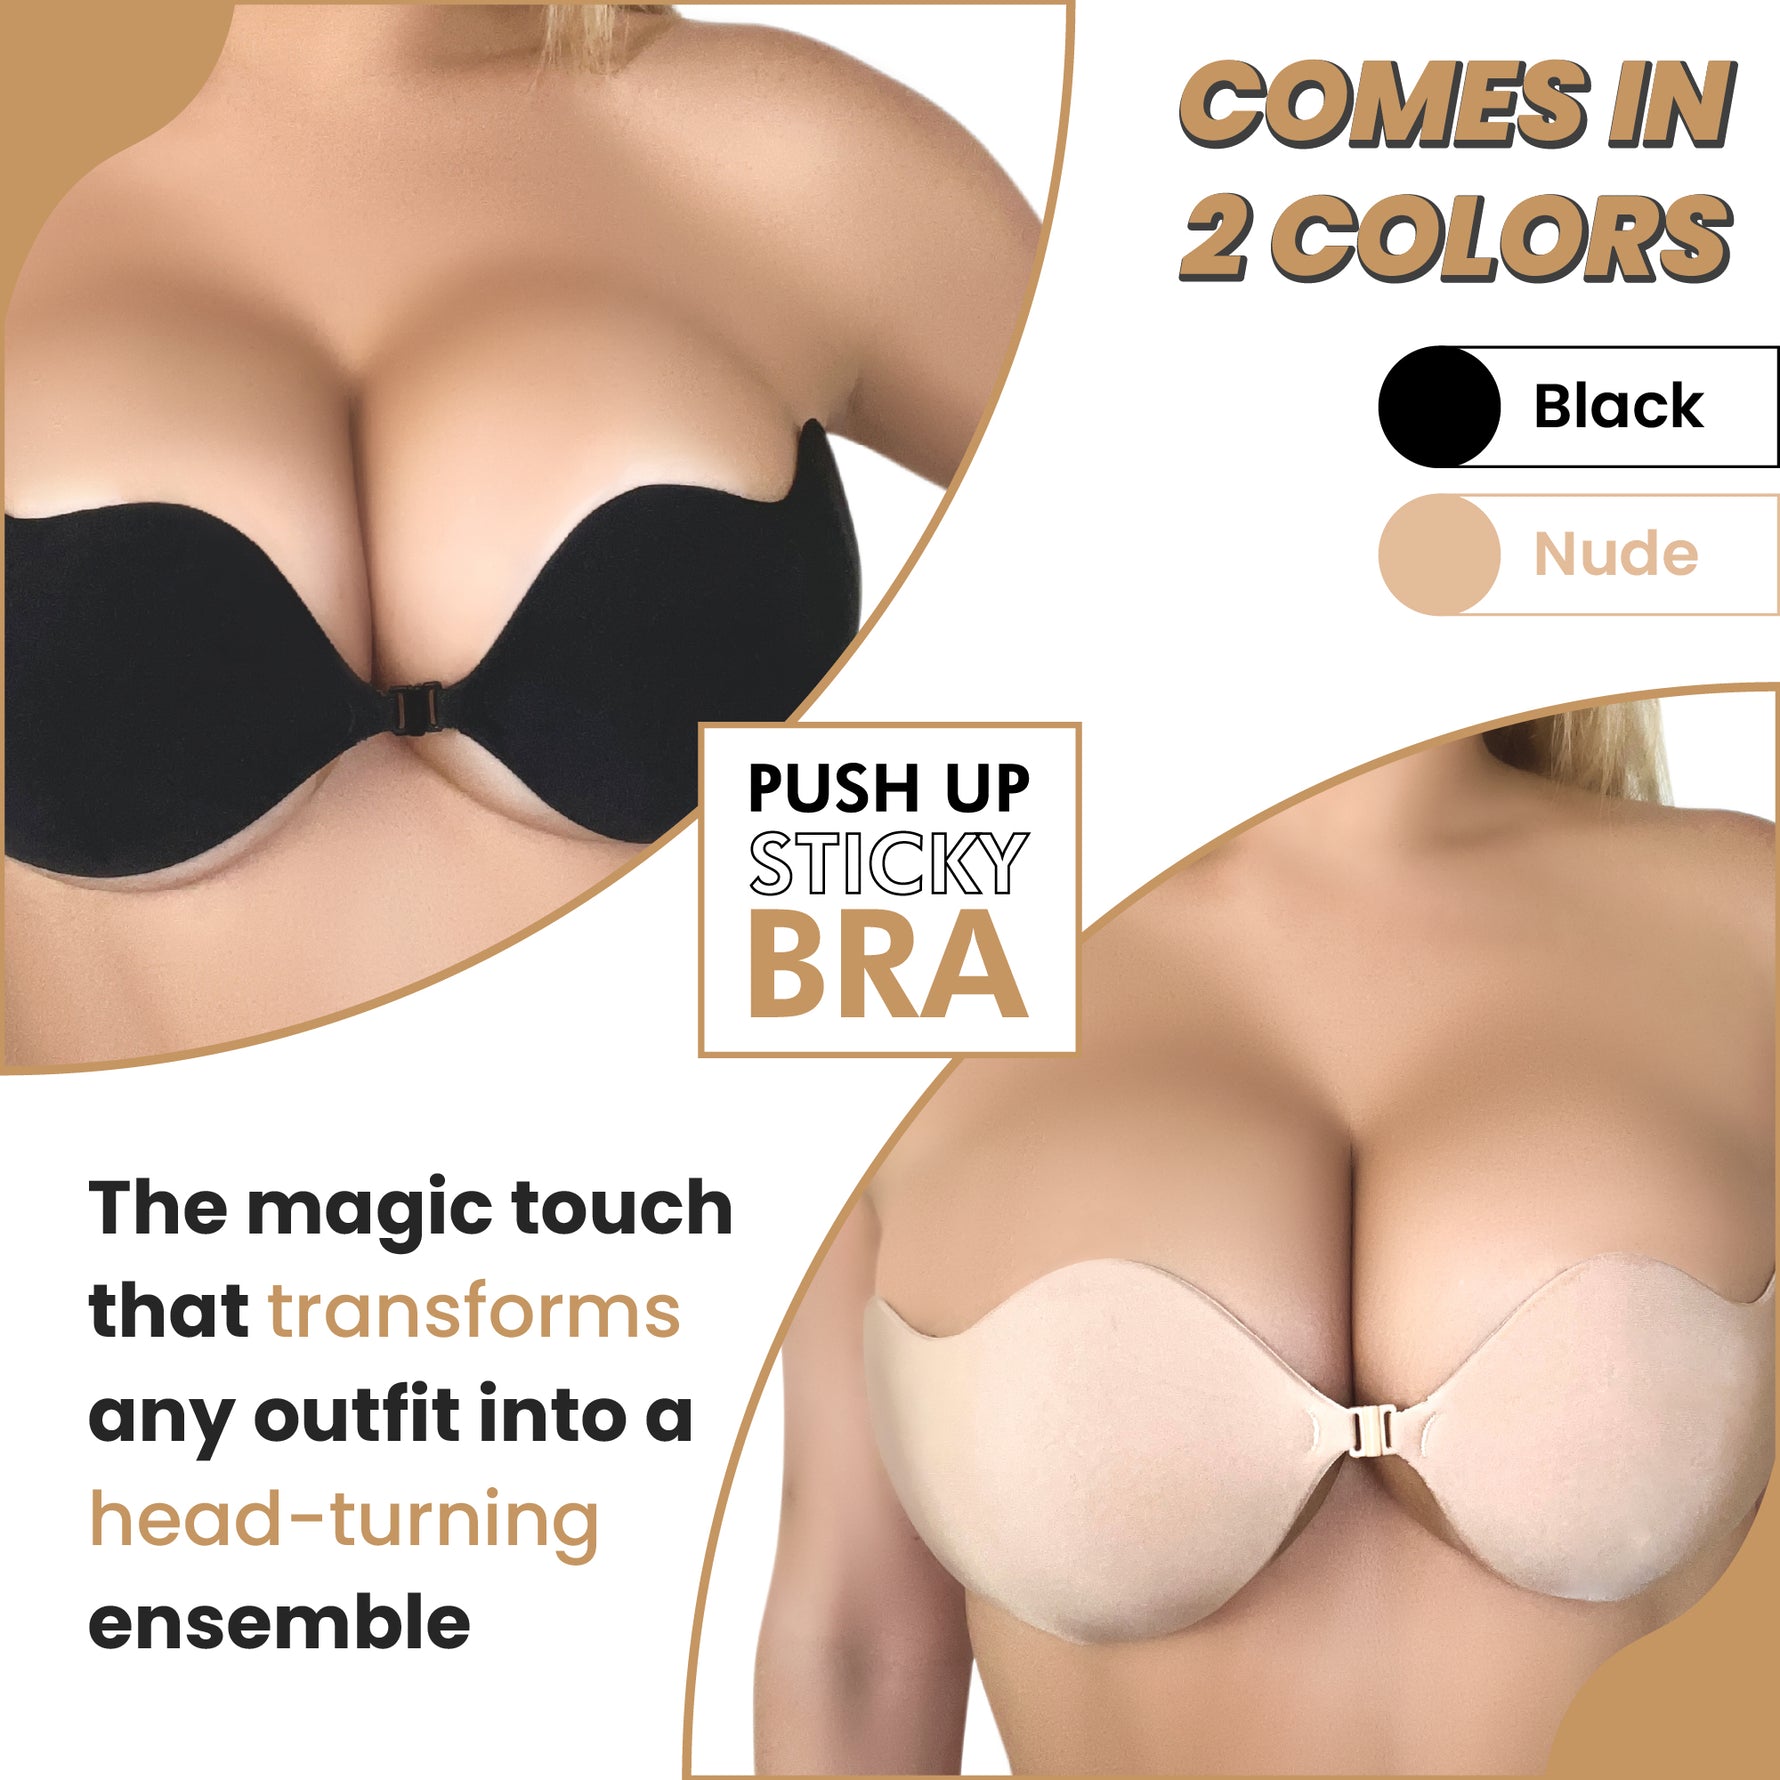 Women Super Sticky Bra, Strapless Bra | Invisible backless Bras Self Adhesive Bra | Push up bras for women | 5pairs Sticky bras for ladies. - Suwais.Fashion